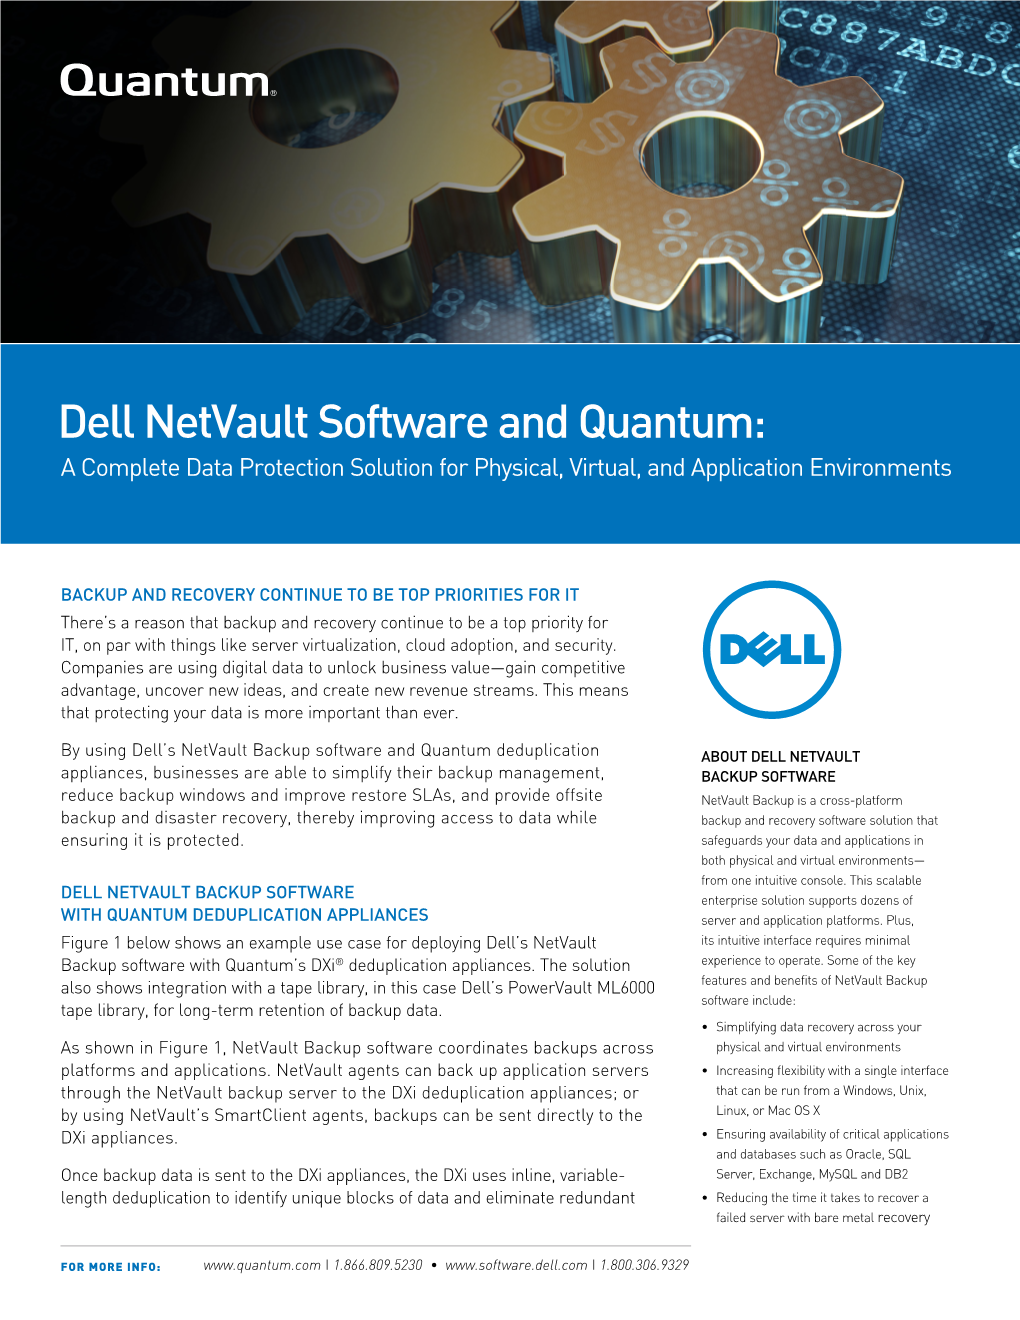 Dell Netvault Software and Quantum: a Complete Data Protection Solution for Physical, Virtual, and Application Environments